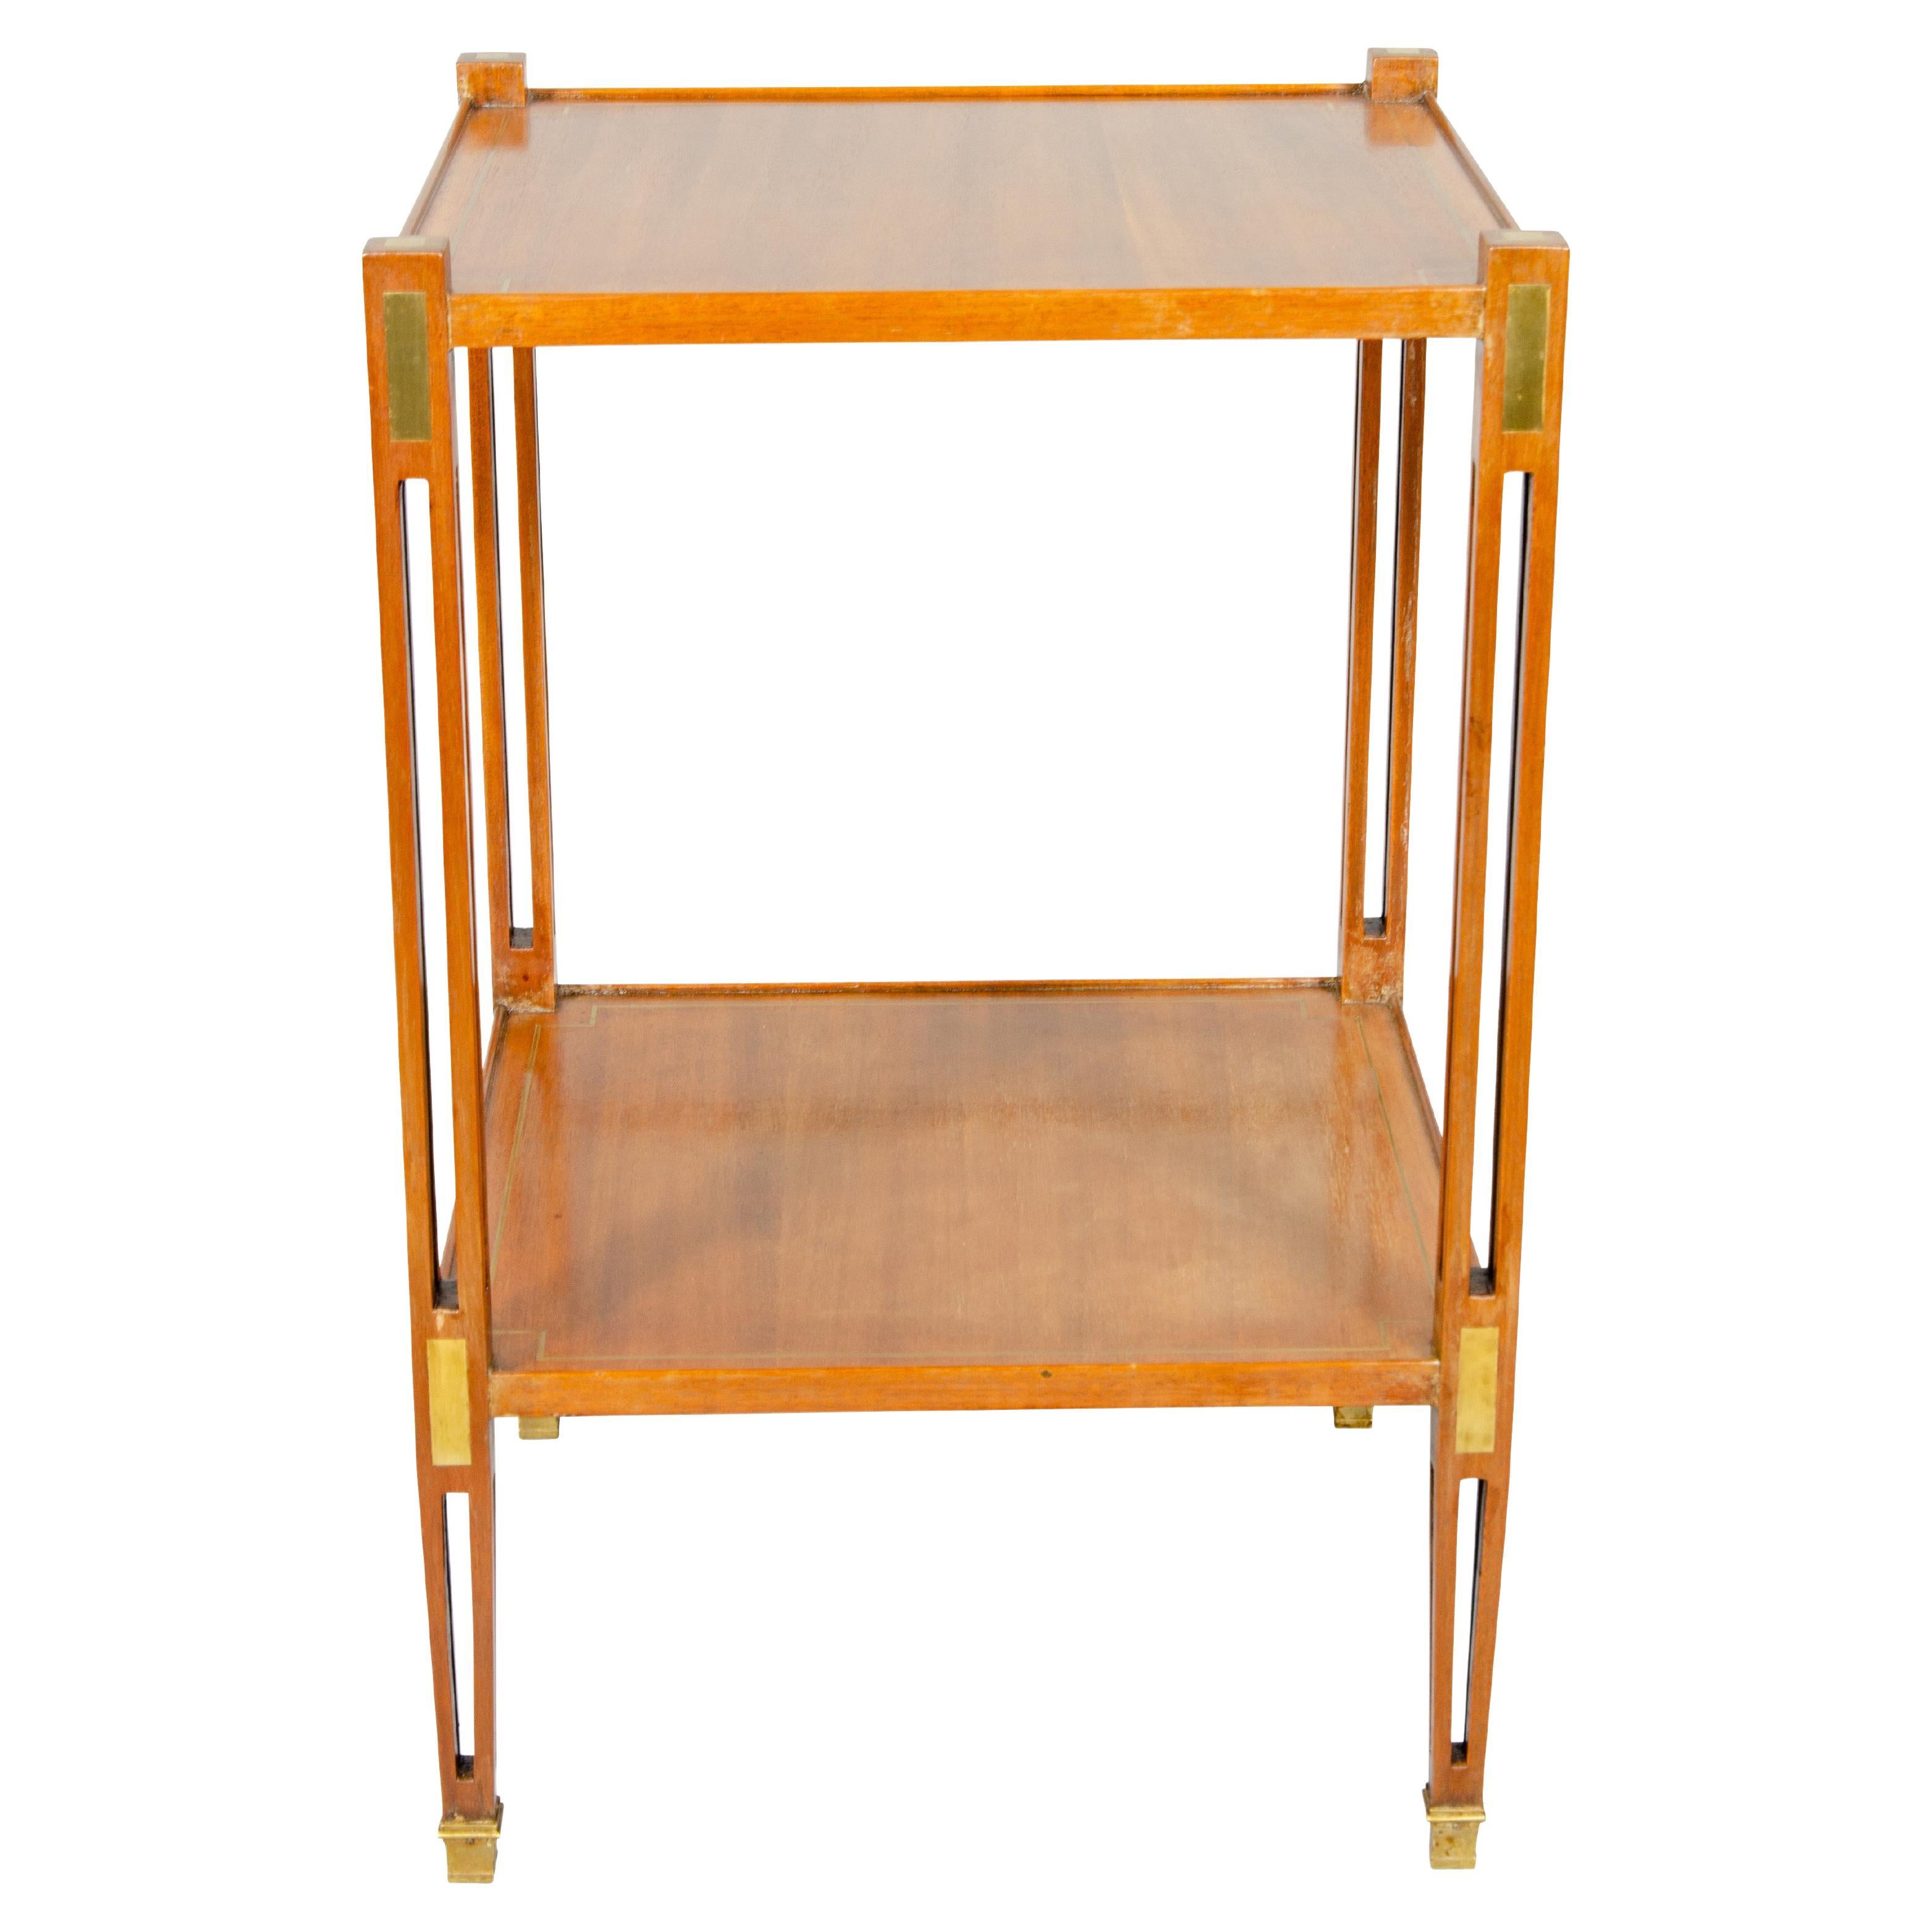 Square top with conforming lower shelf with pierced legs with brass inset panels, square tapered legs.